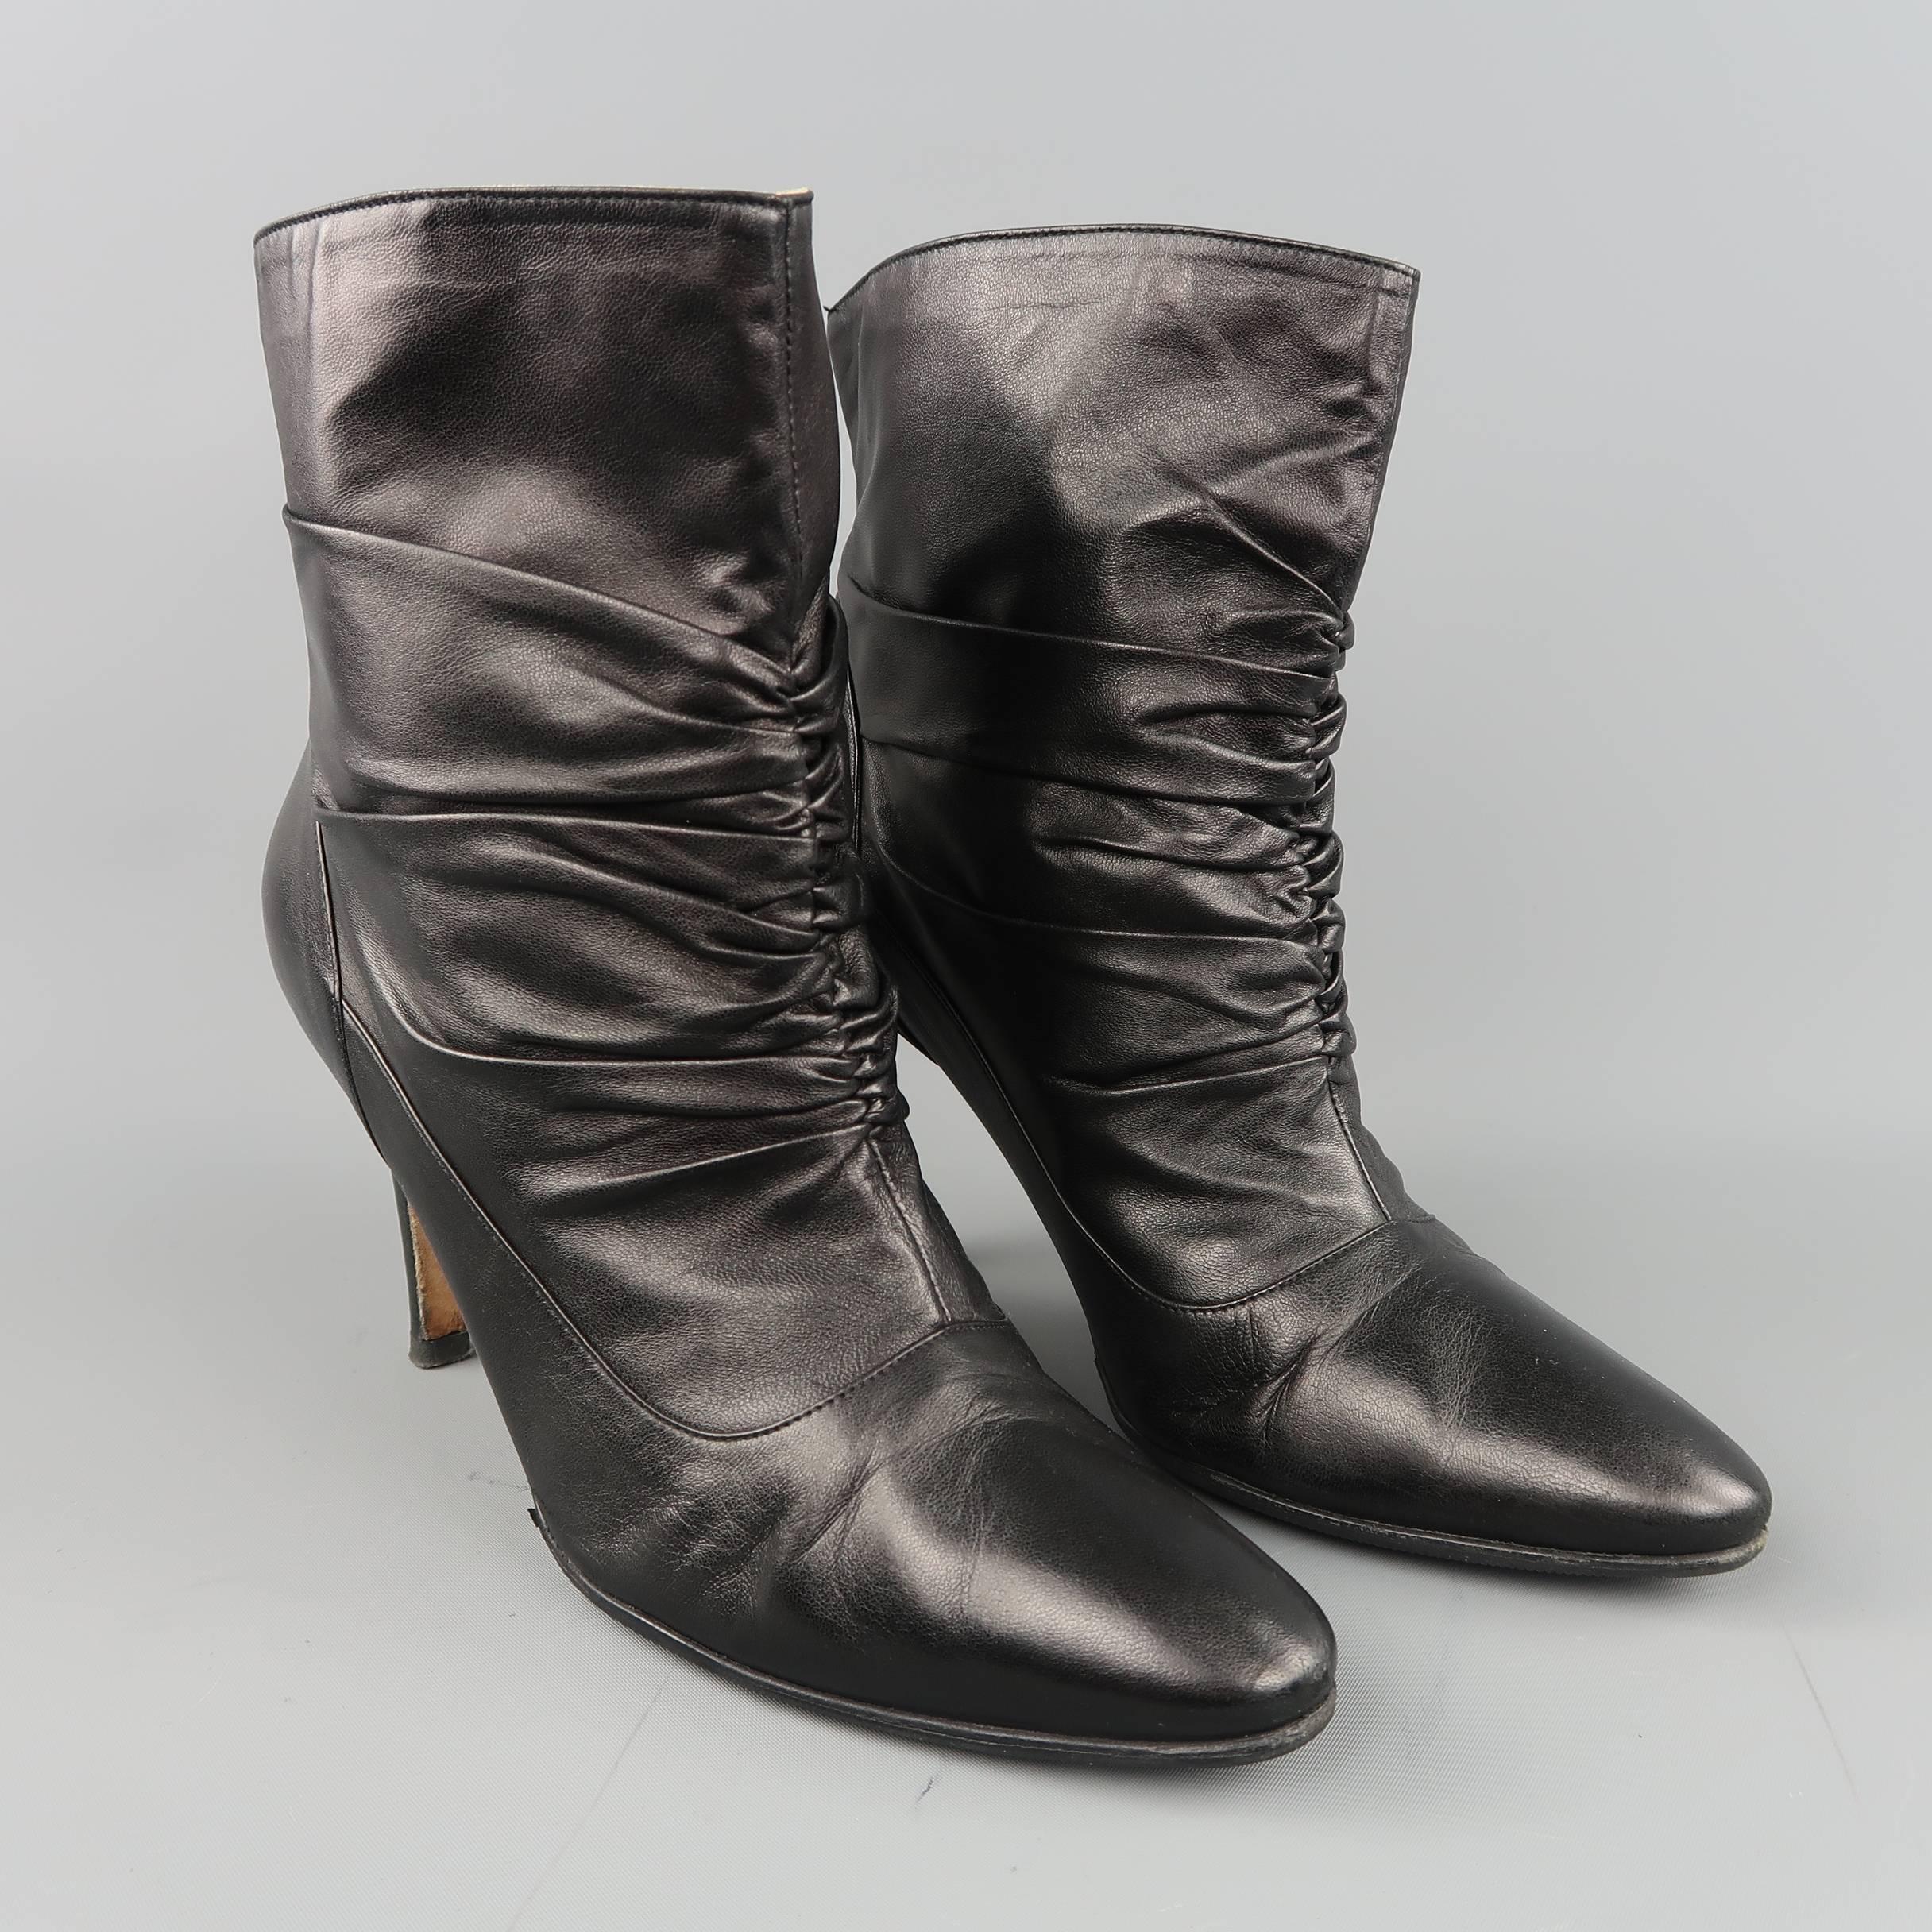 MANOLO BLAHNIK ankle boots come in smooth black leather with a pointed toe, covered stiletto heel, and ruched front detail. Resoled. Made in Italy.
 
Good Pre-Owned Condition.
Marked: IT 38.5
 
Measurements:
 
Heel: 3.5 in.